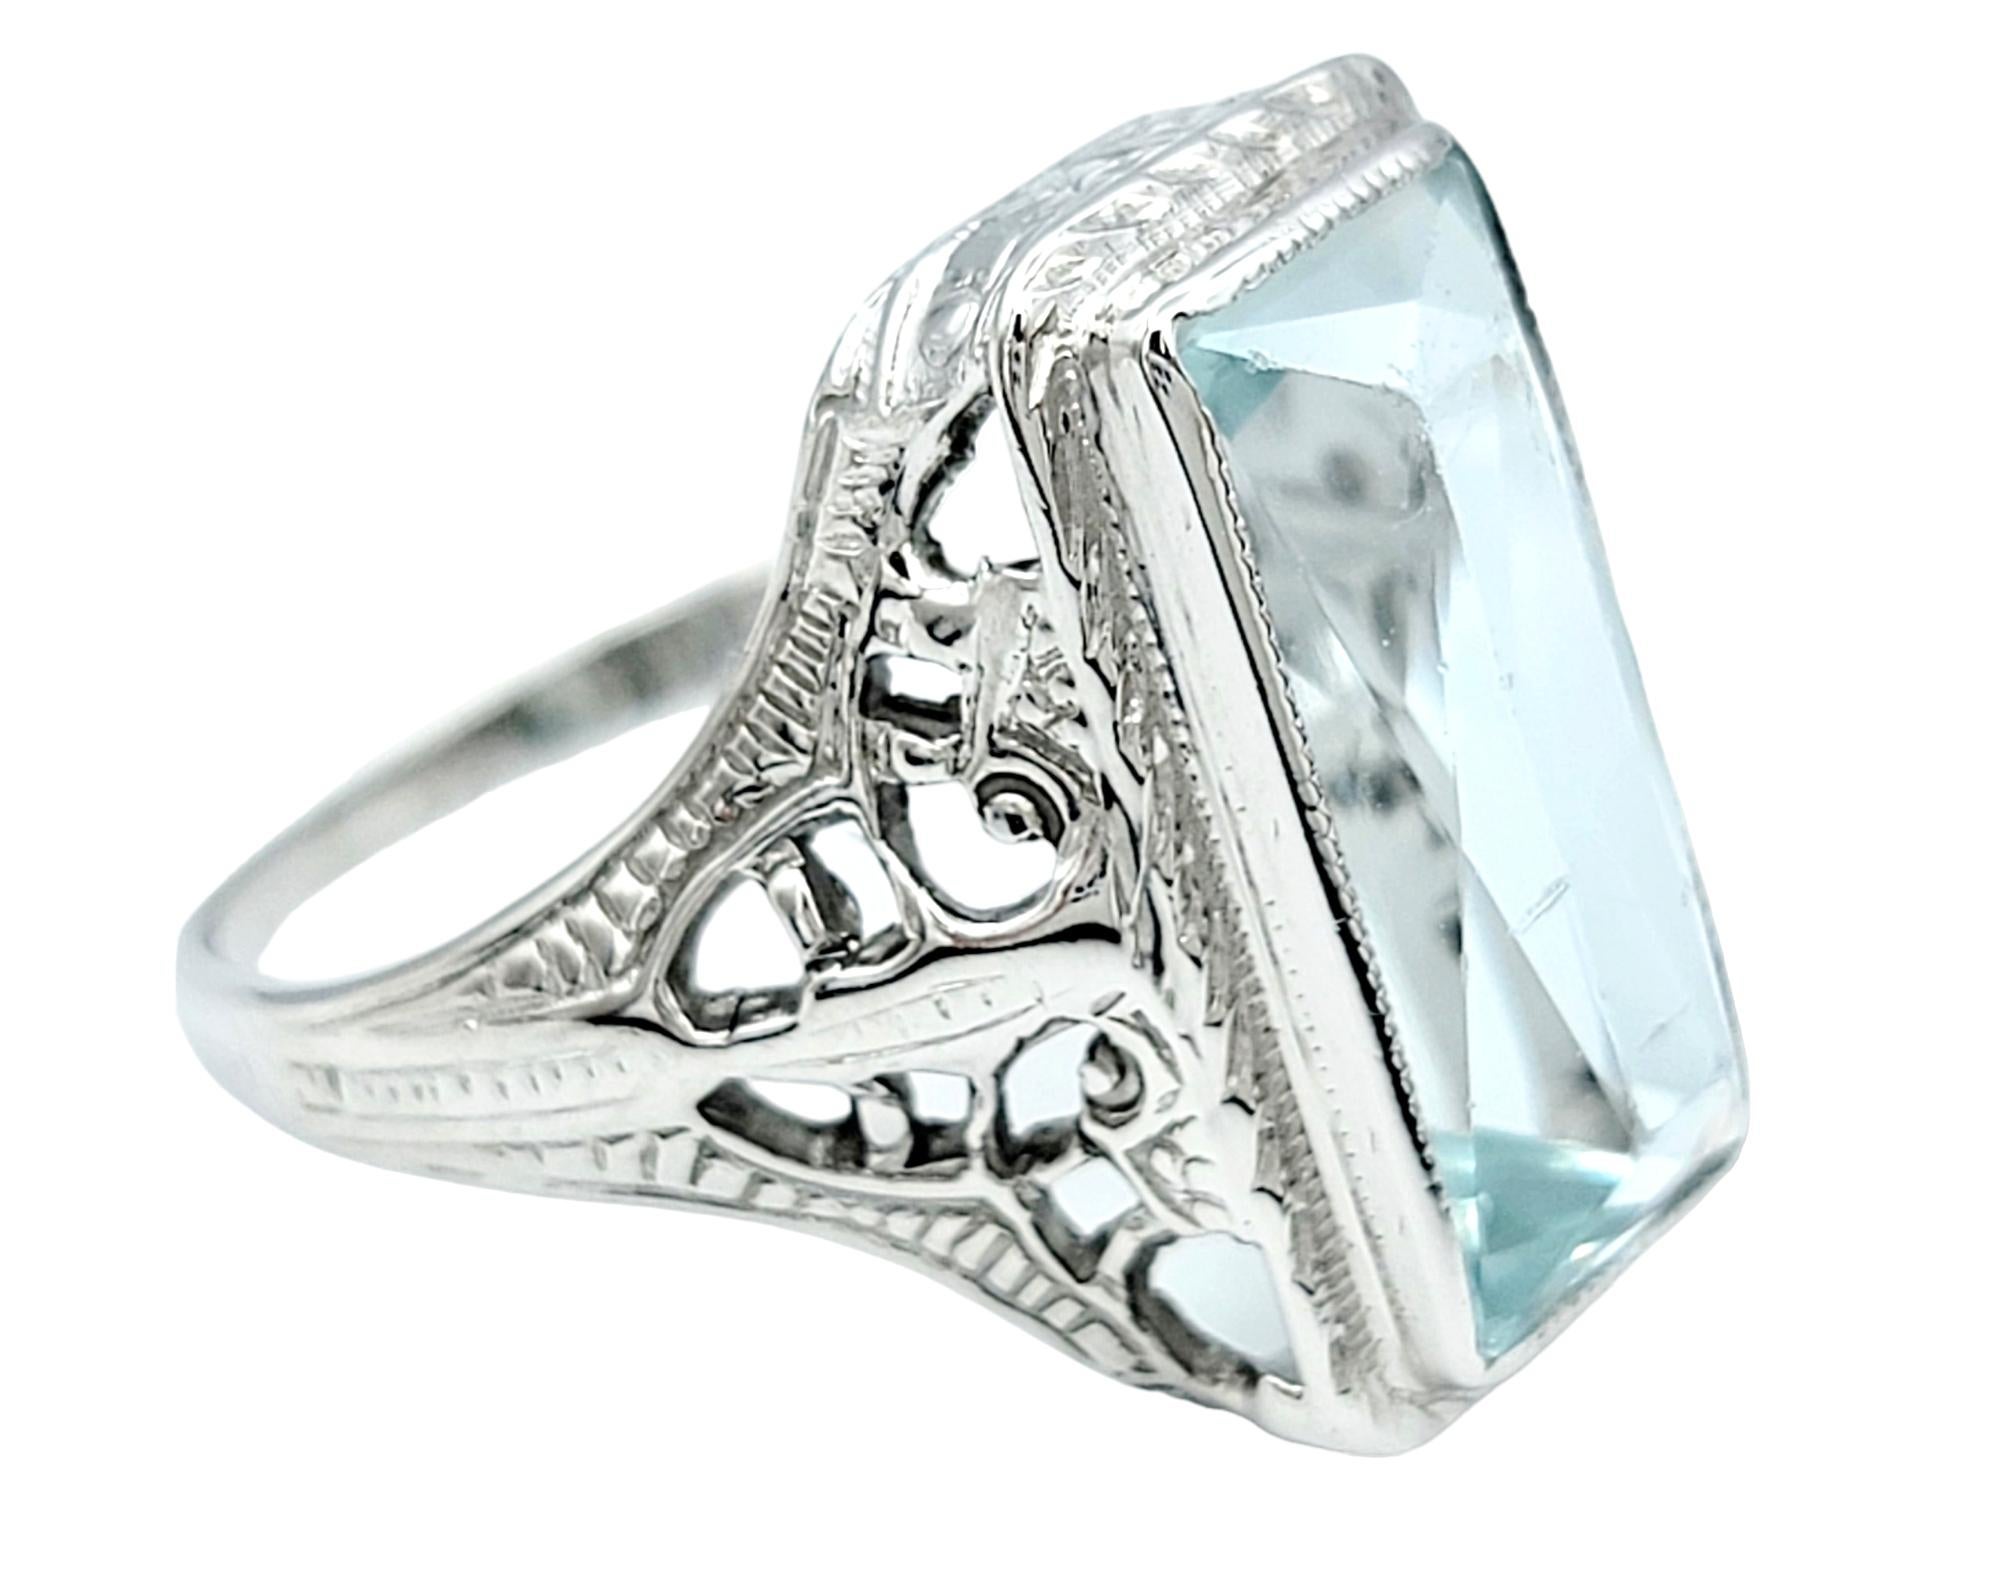 4.00 Carat Vintage Aquamarine Cocktail Ring with Milgrain in 18 Karat White Gold In Good Condition For Sale In Scottsdale, AZ